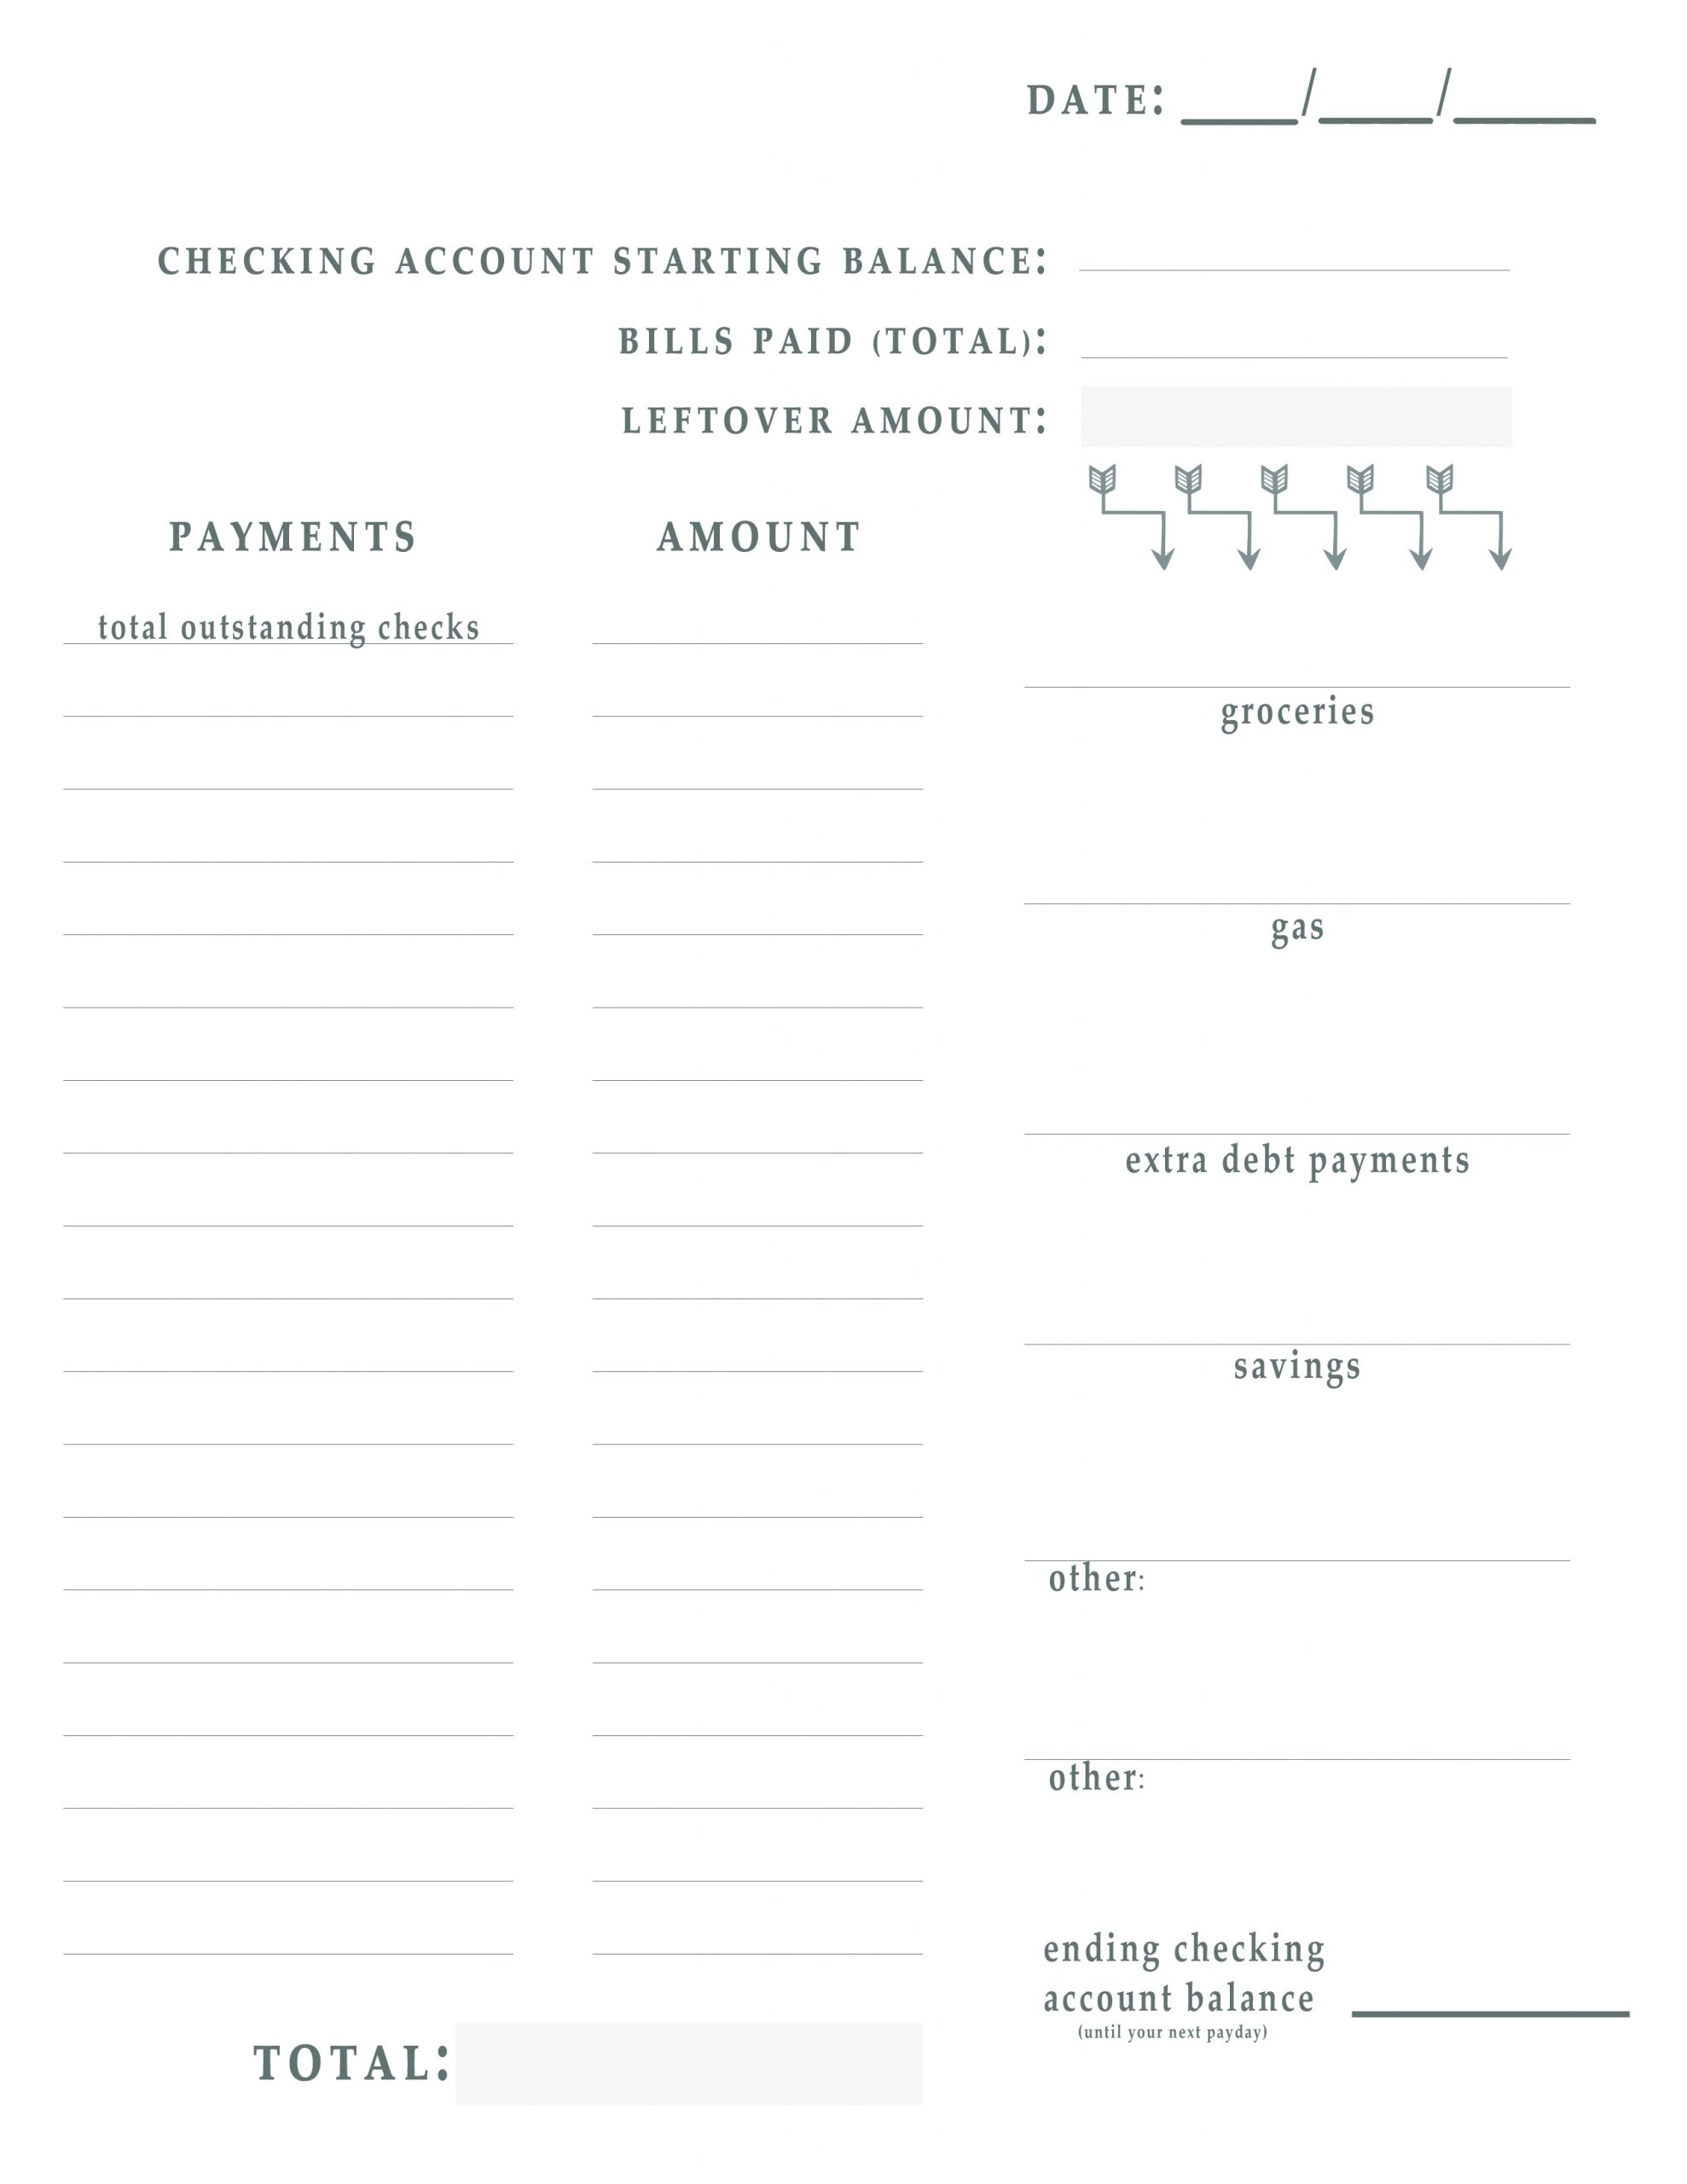 Pick Weekly Payments Worksheets